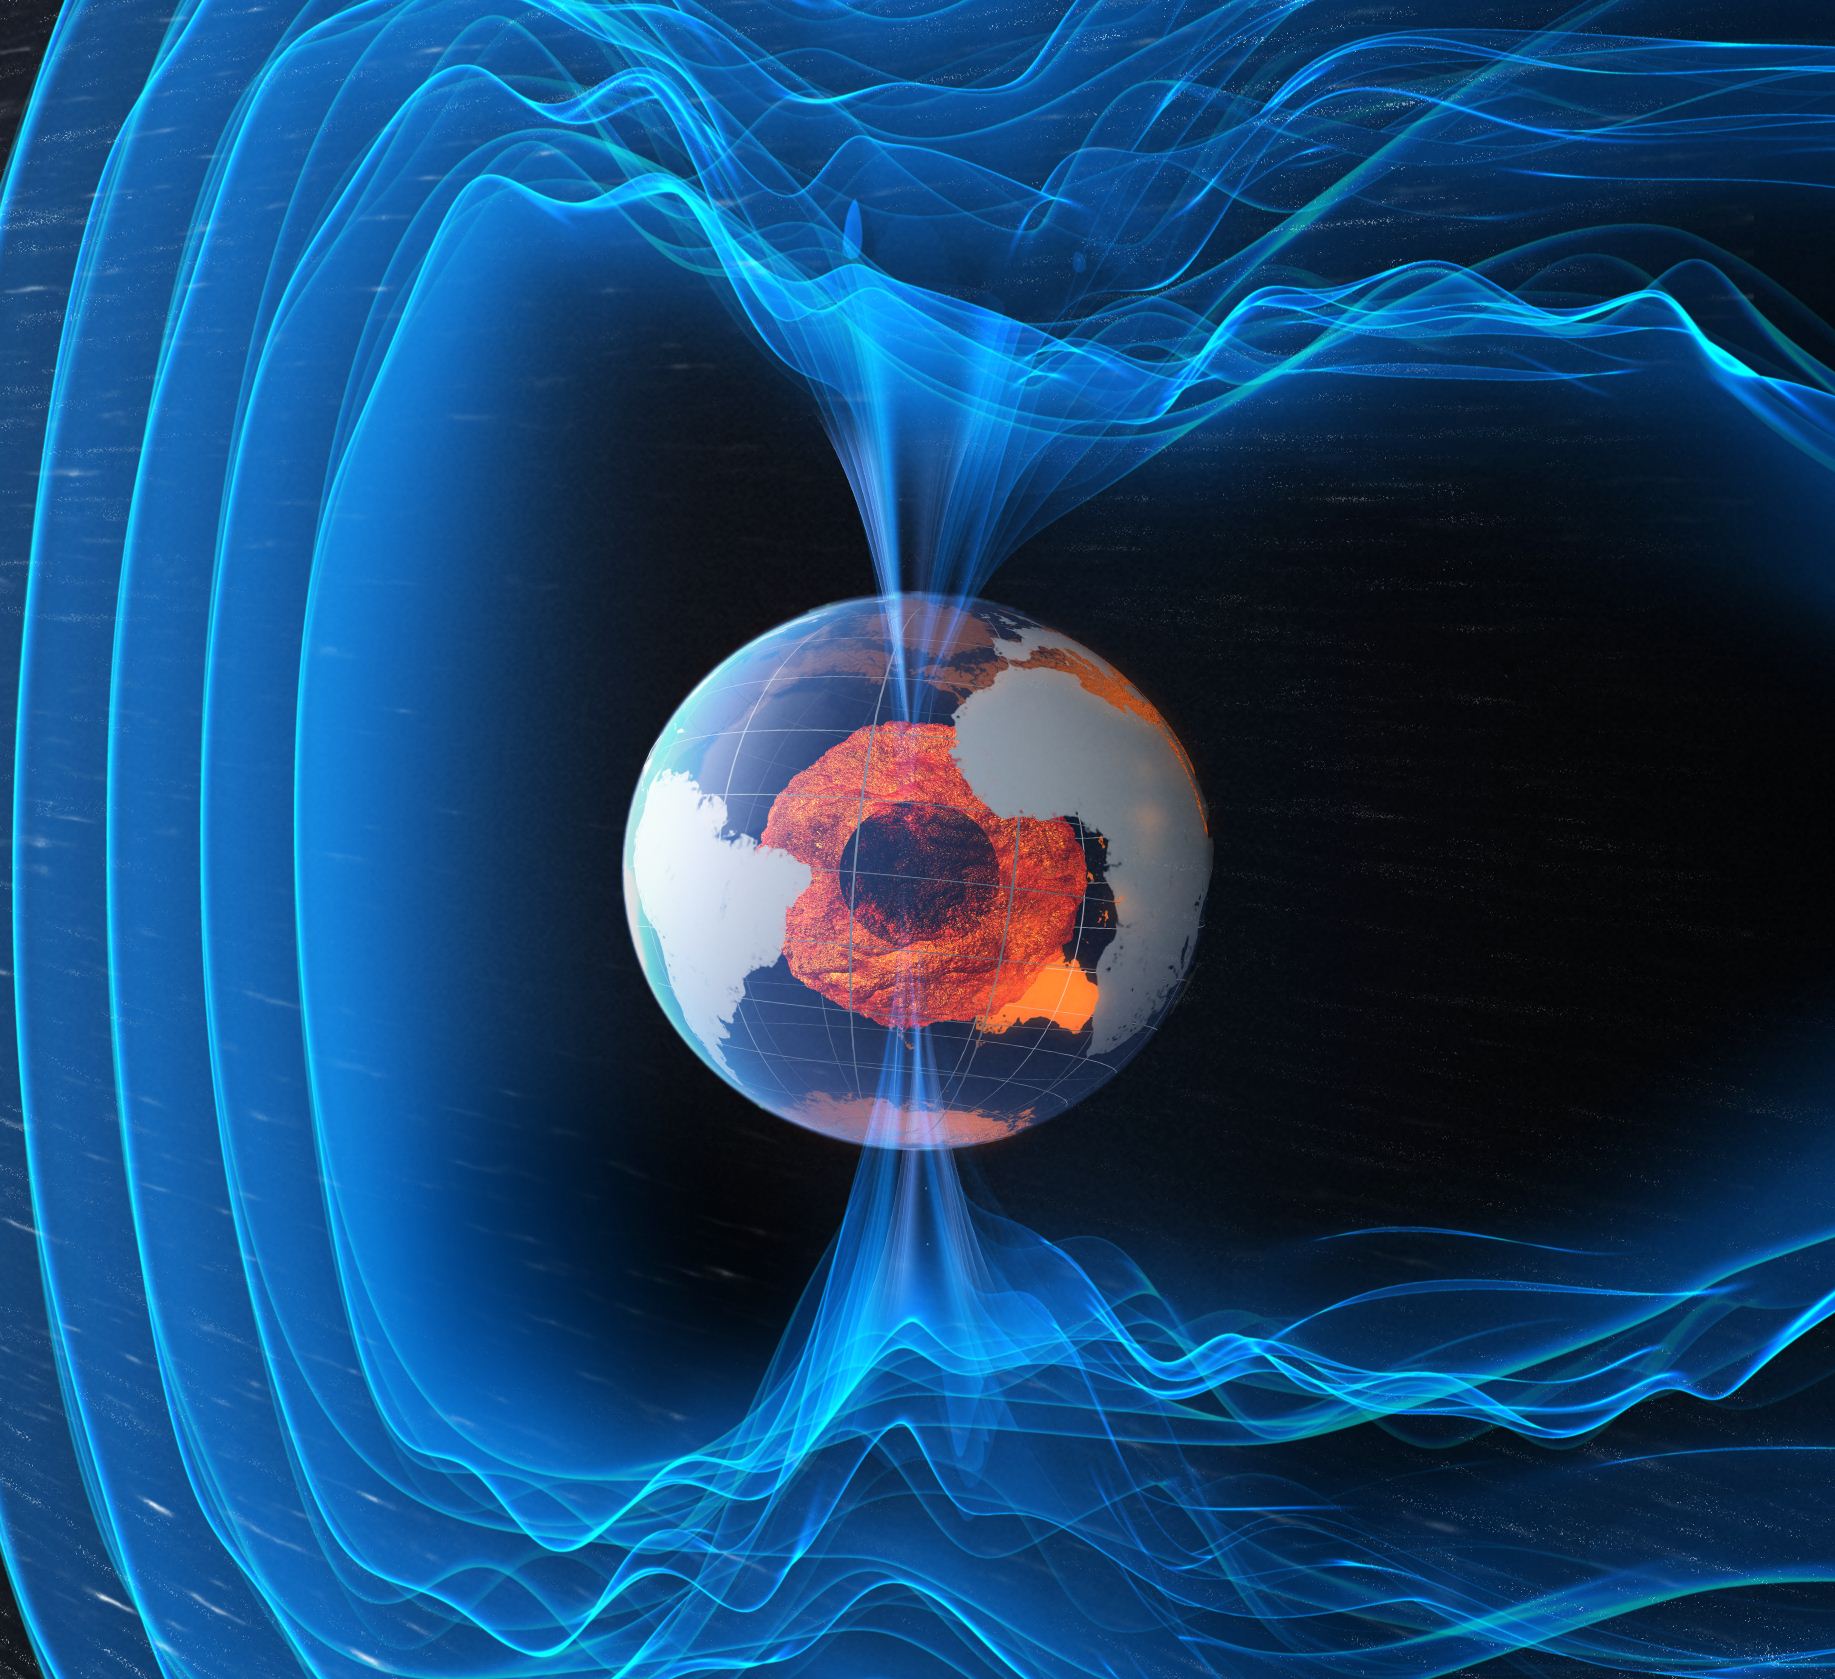 http://www.esa.int/spaceinimages/Images/2013/11/Earth_s_magnetic_field